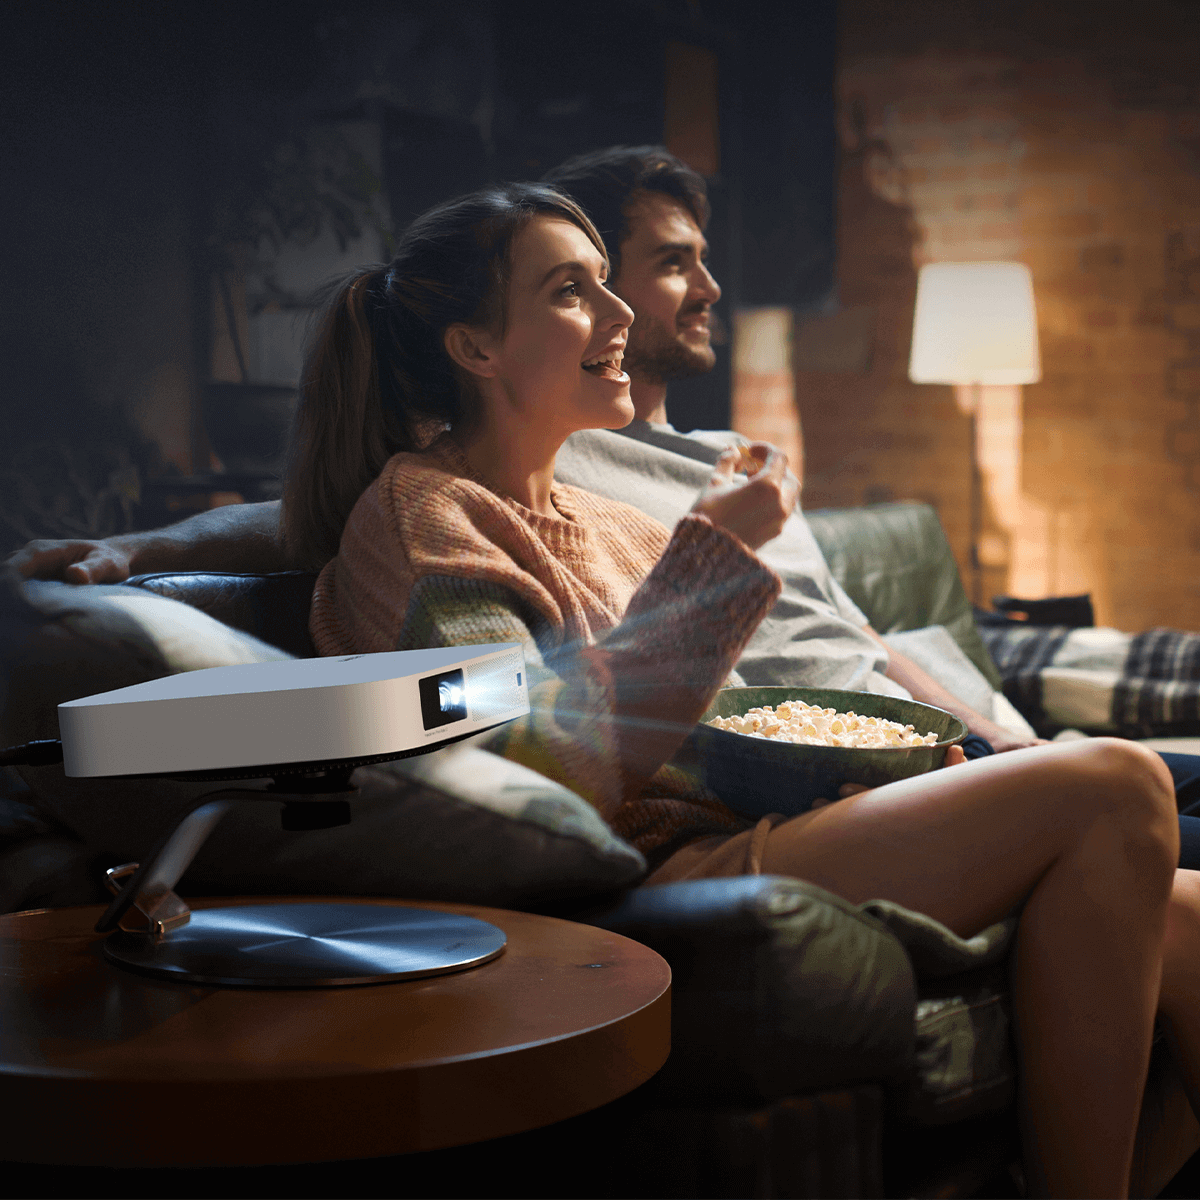 Enjoy the best romantic movies with Elfin 1080p compact projector of your own home